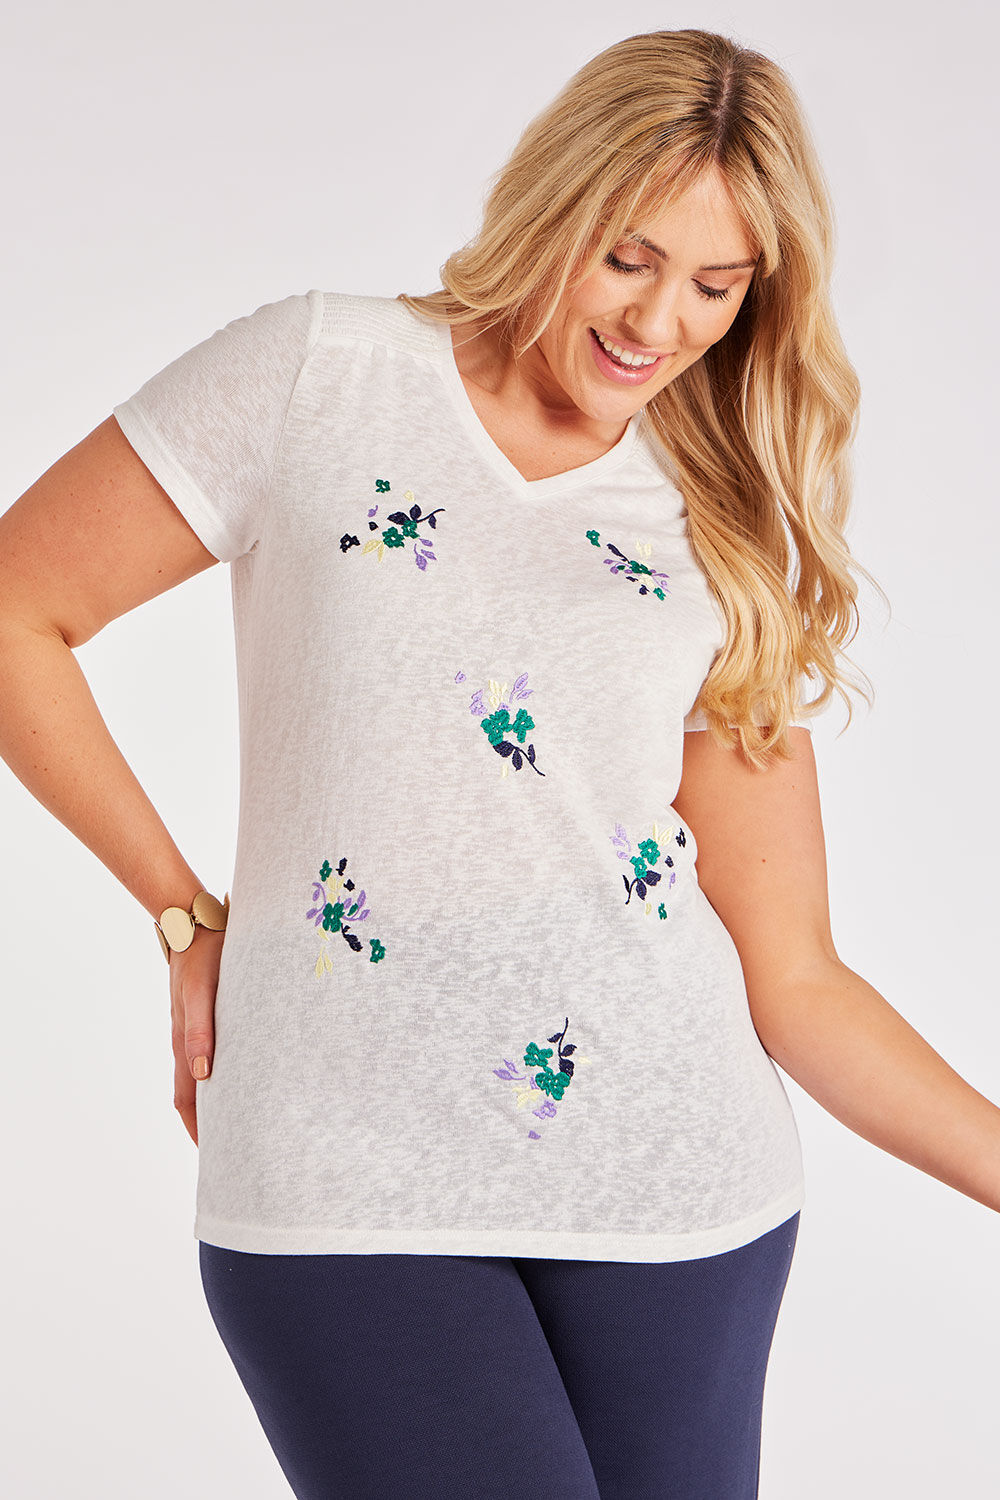 Bonmarche Ivory Short Sleeves Embroidered Flower T-Shirt, Size: 14